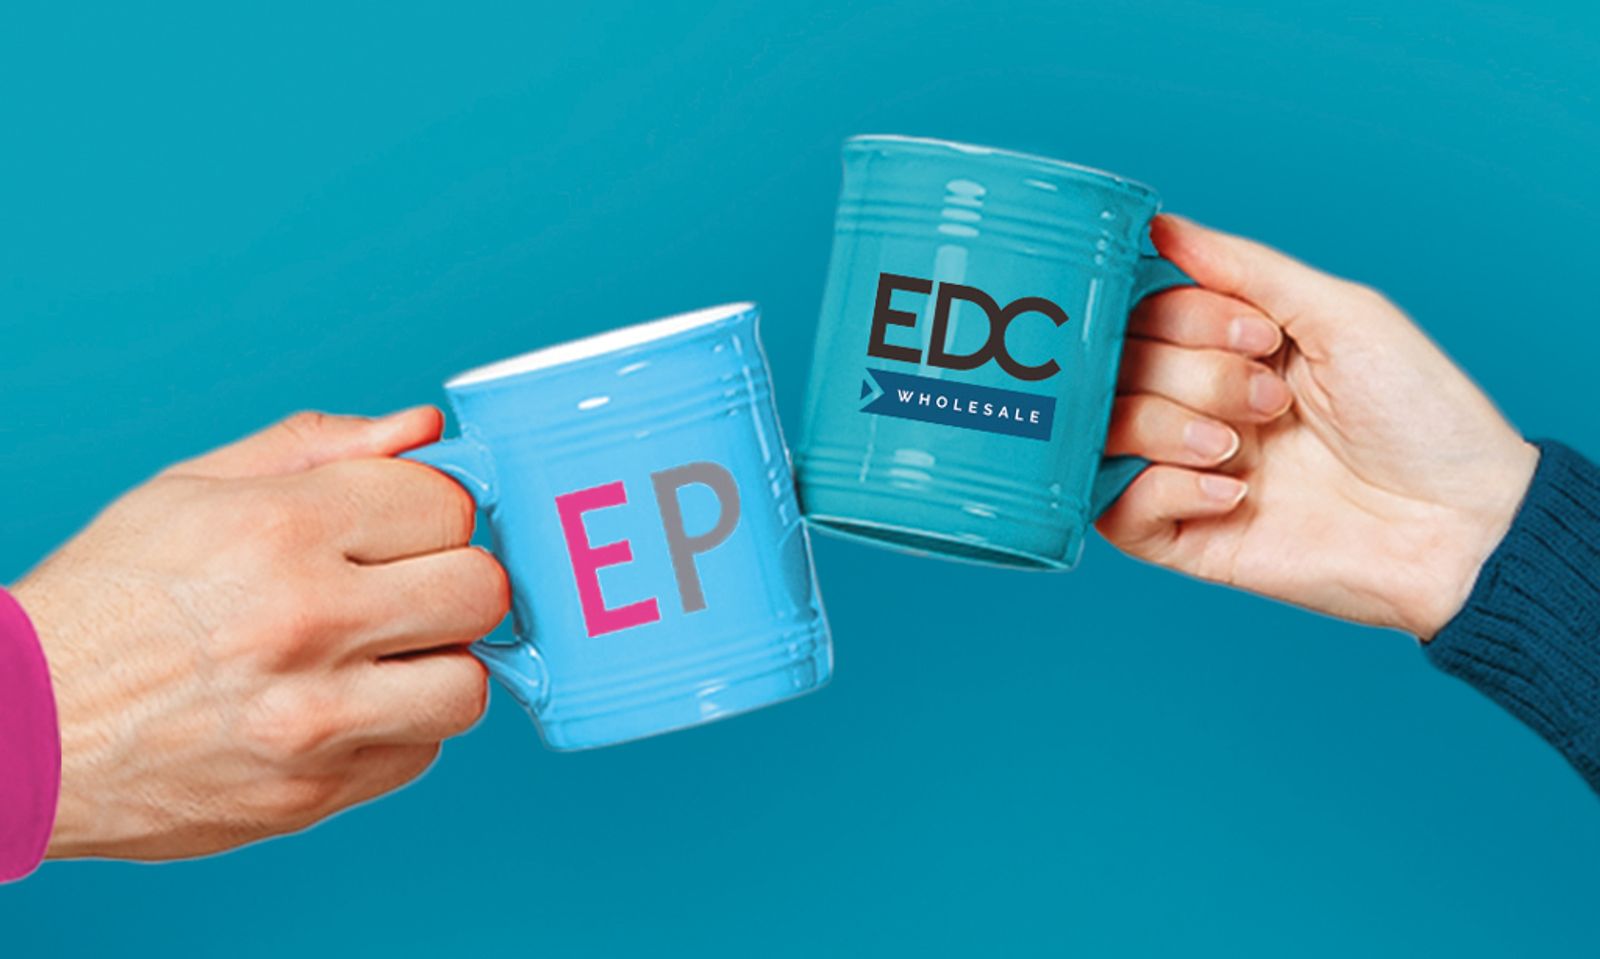 EDC Wholesale and Eropartner Team Up for Sexual Wellness